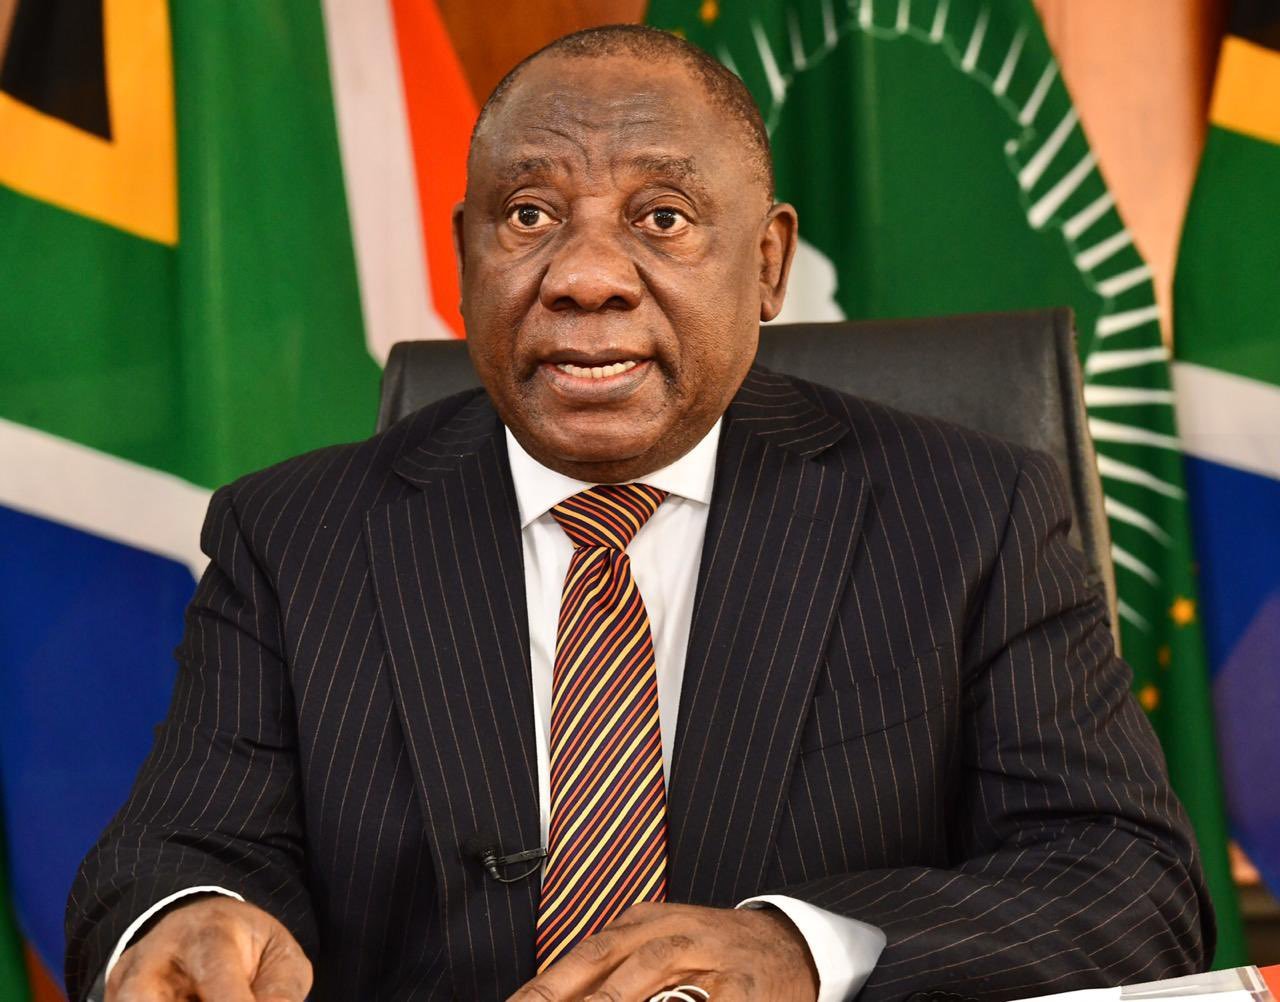 Ramaphosa calls on African leaders to work together to stop violence and terrorism in Africa